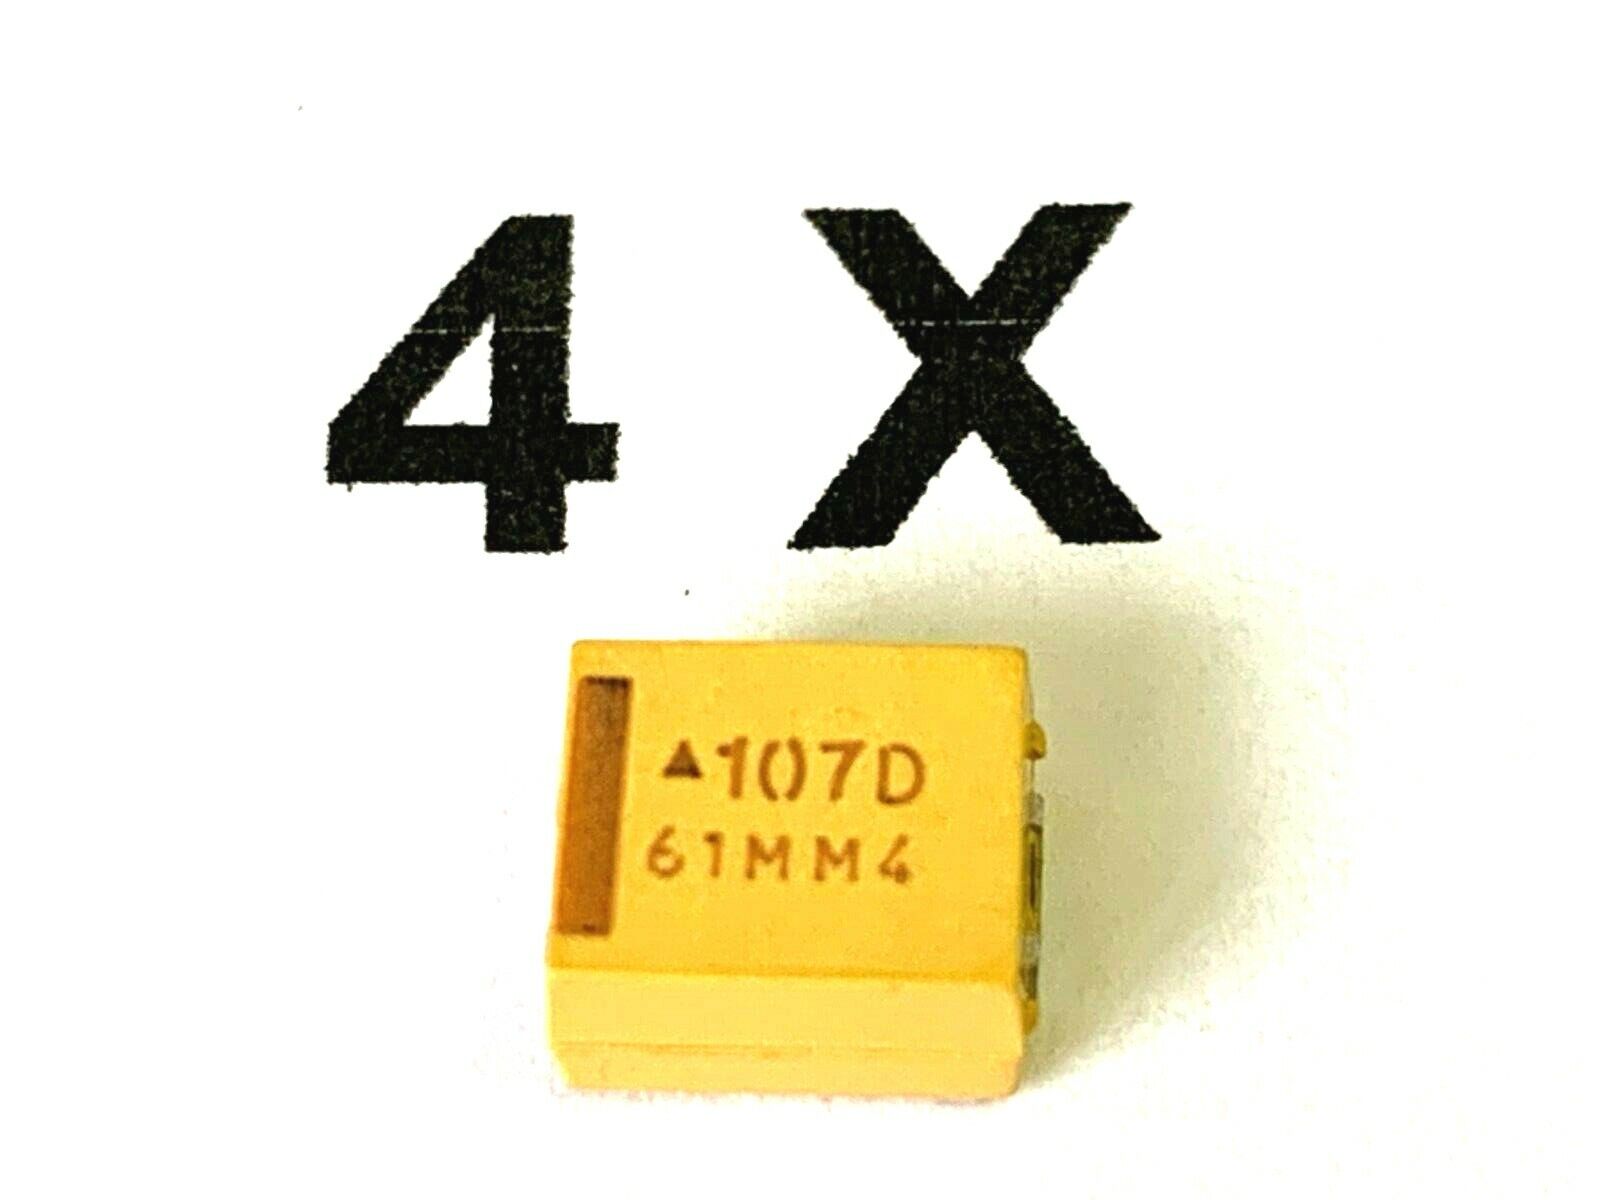 100uF, 20V, 10%, 85mR, BF=V, Tantalum, 100μF, SMD, AVX, TPSV107K020R0085, Count of 4